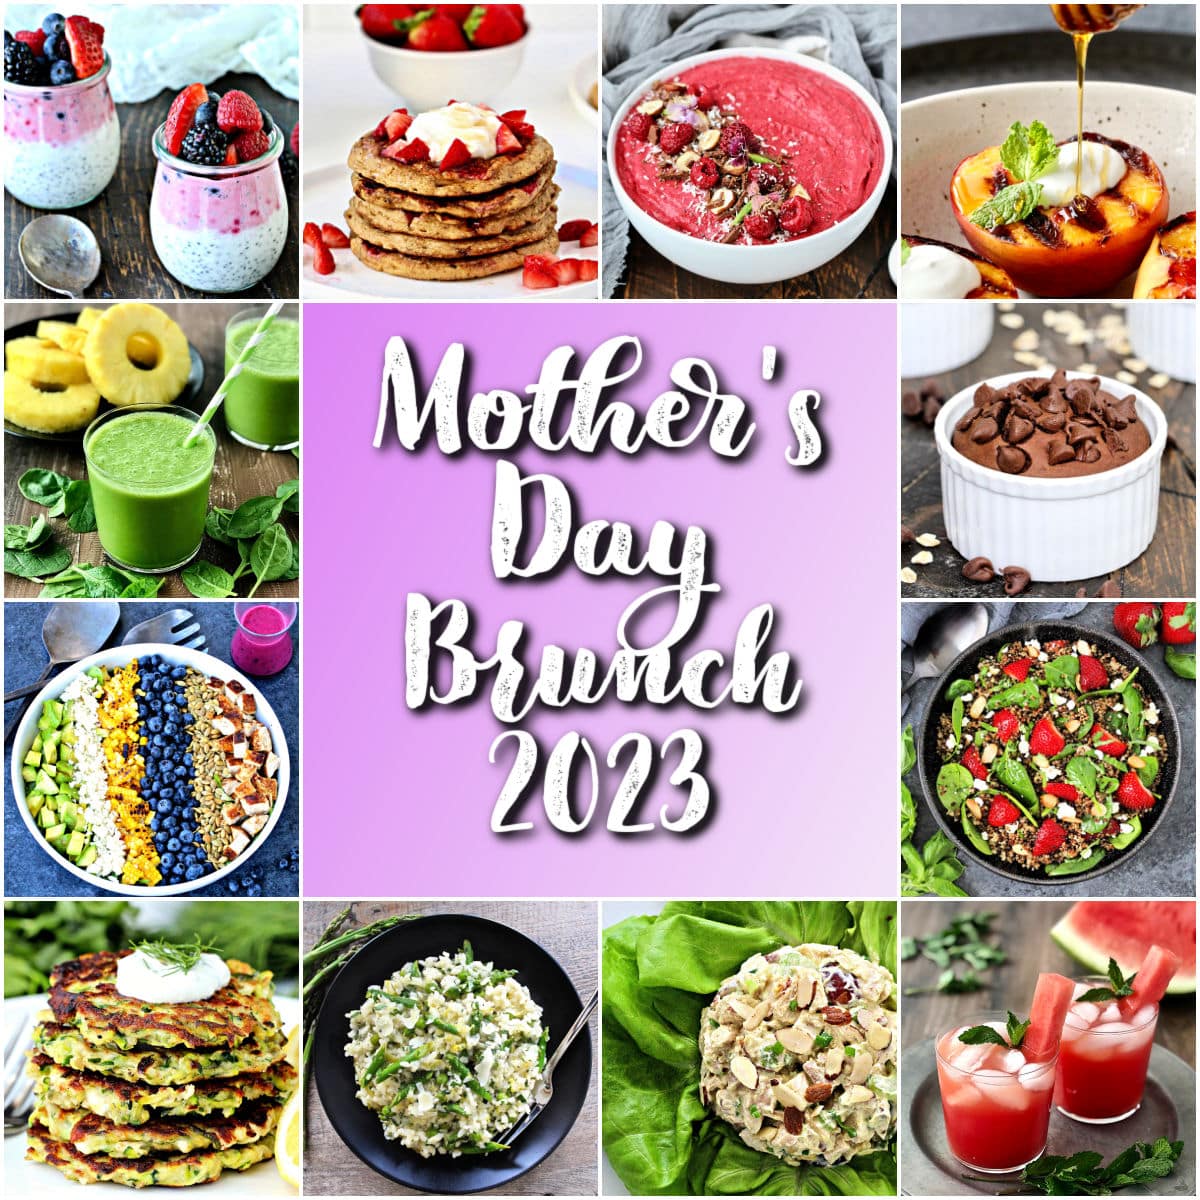 Collage of "Mother's Day Brunch 2023" recipes.